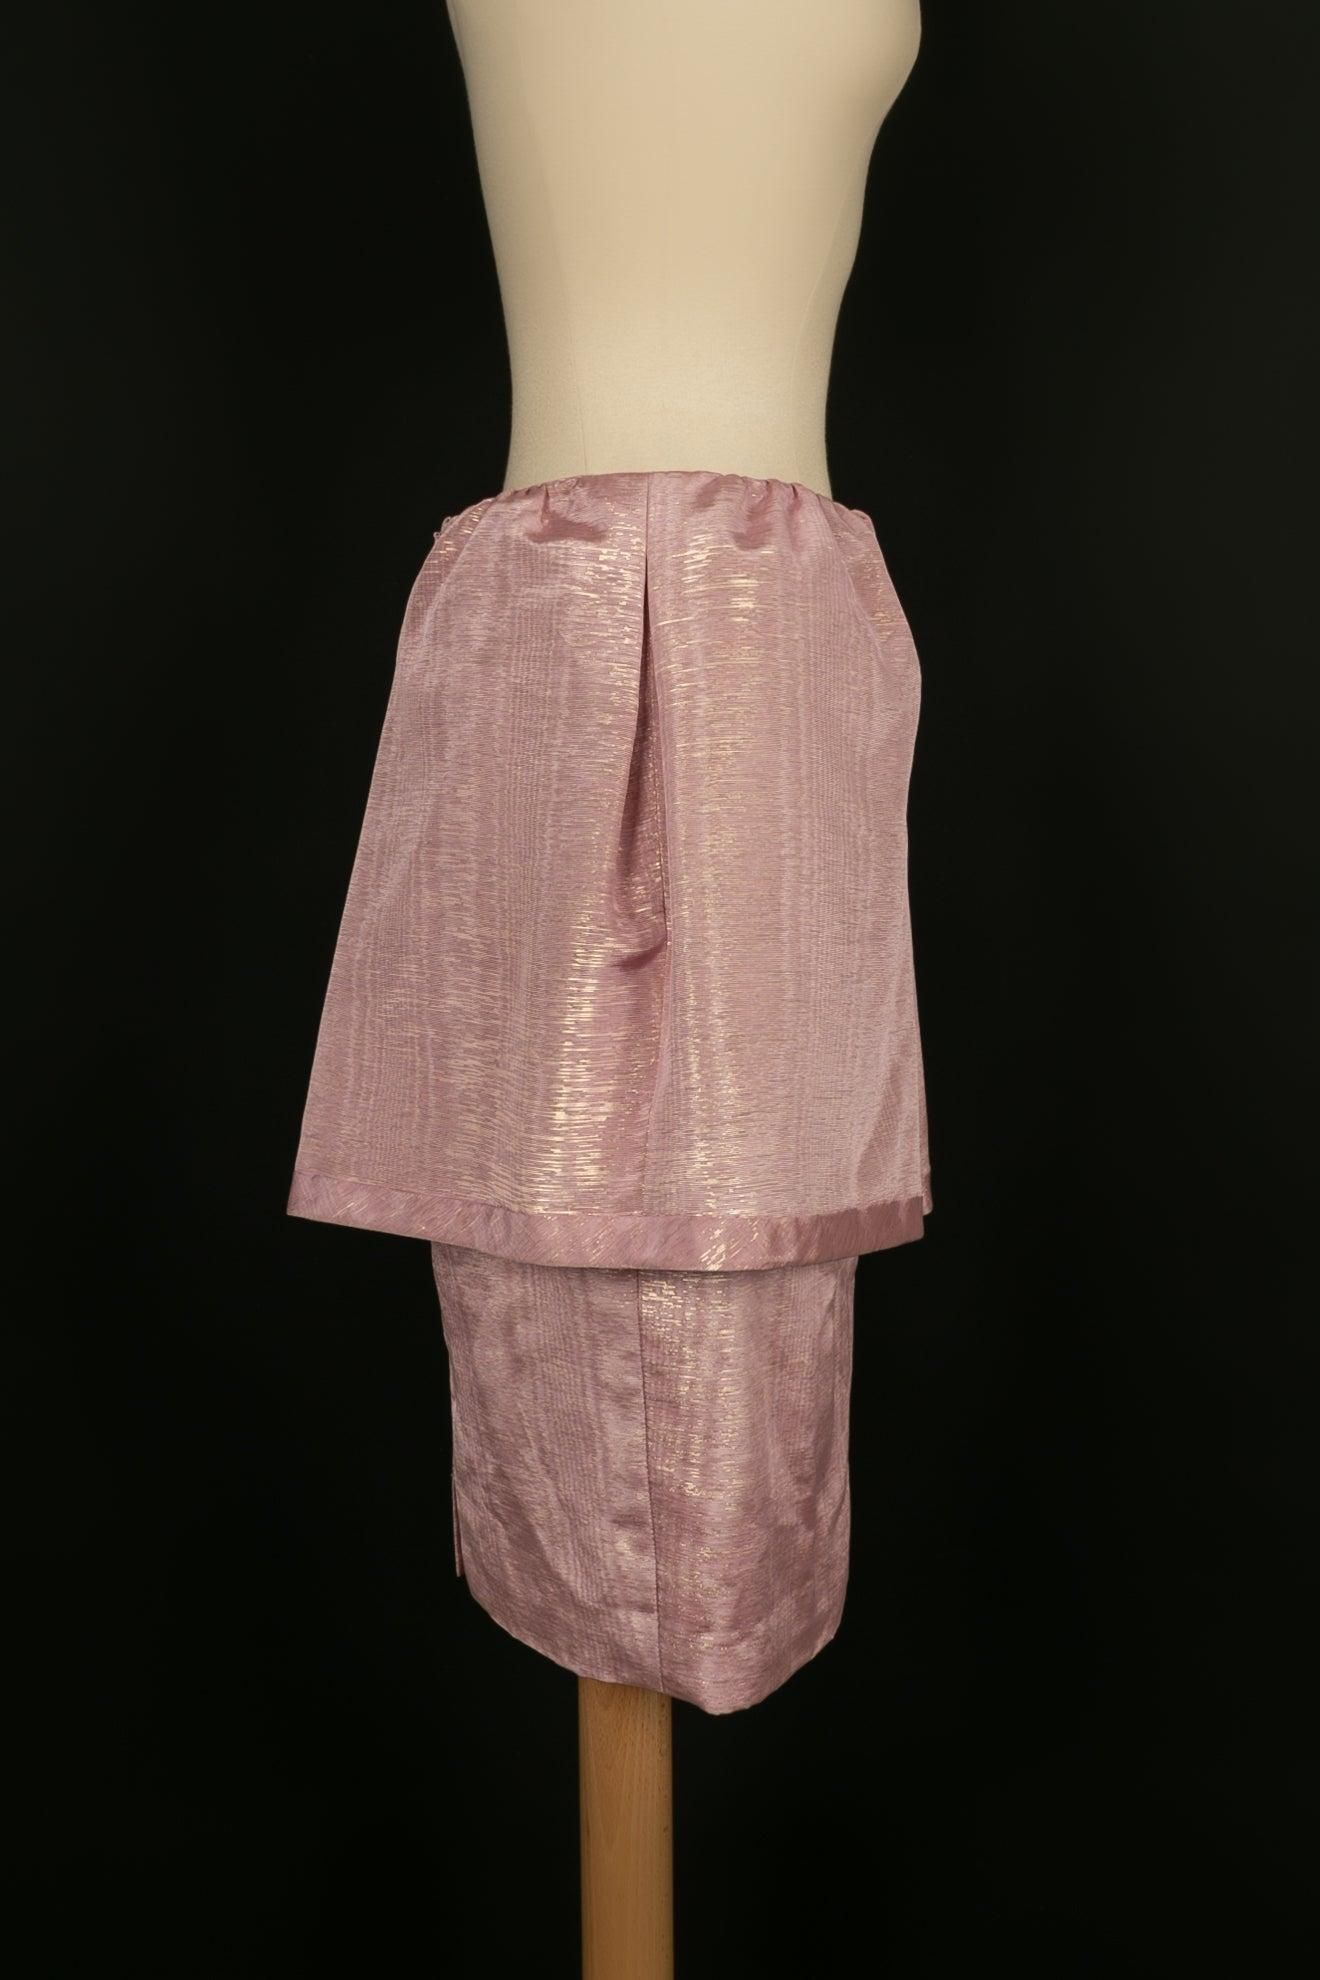 Women's Nina Ricci Skirt in Pink Cotton Enhanced with Gold For Sale